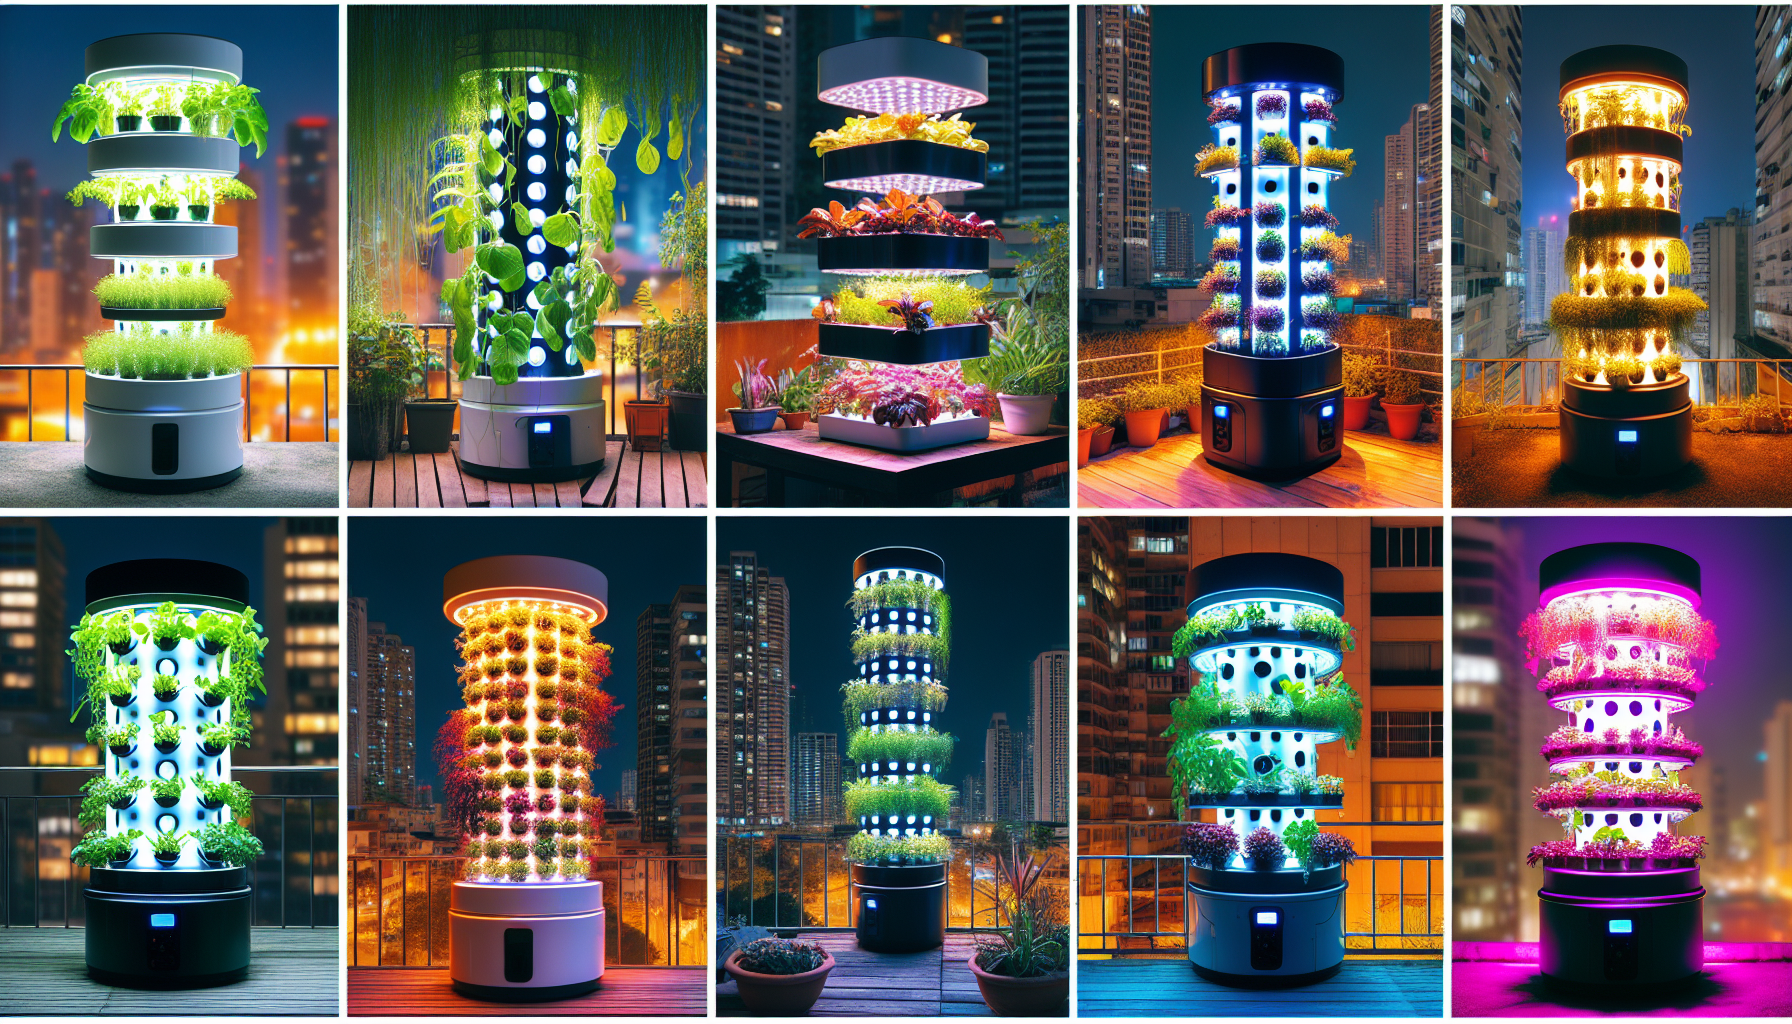 Various aeroponic tower systems with LED lights